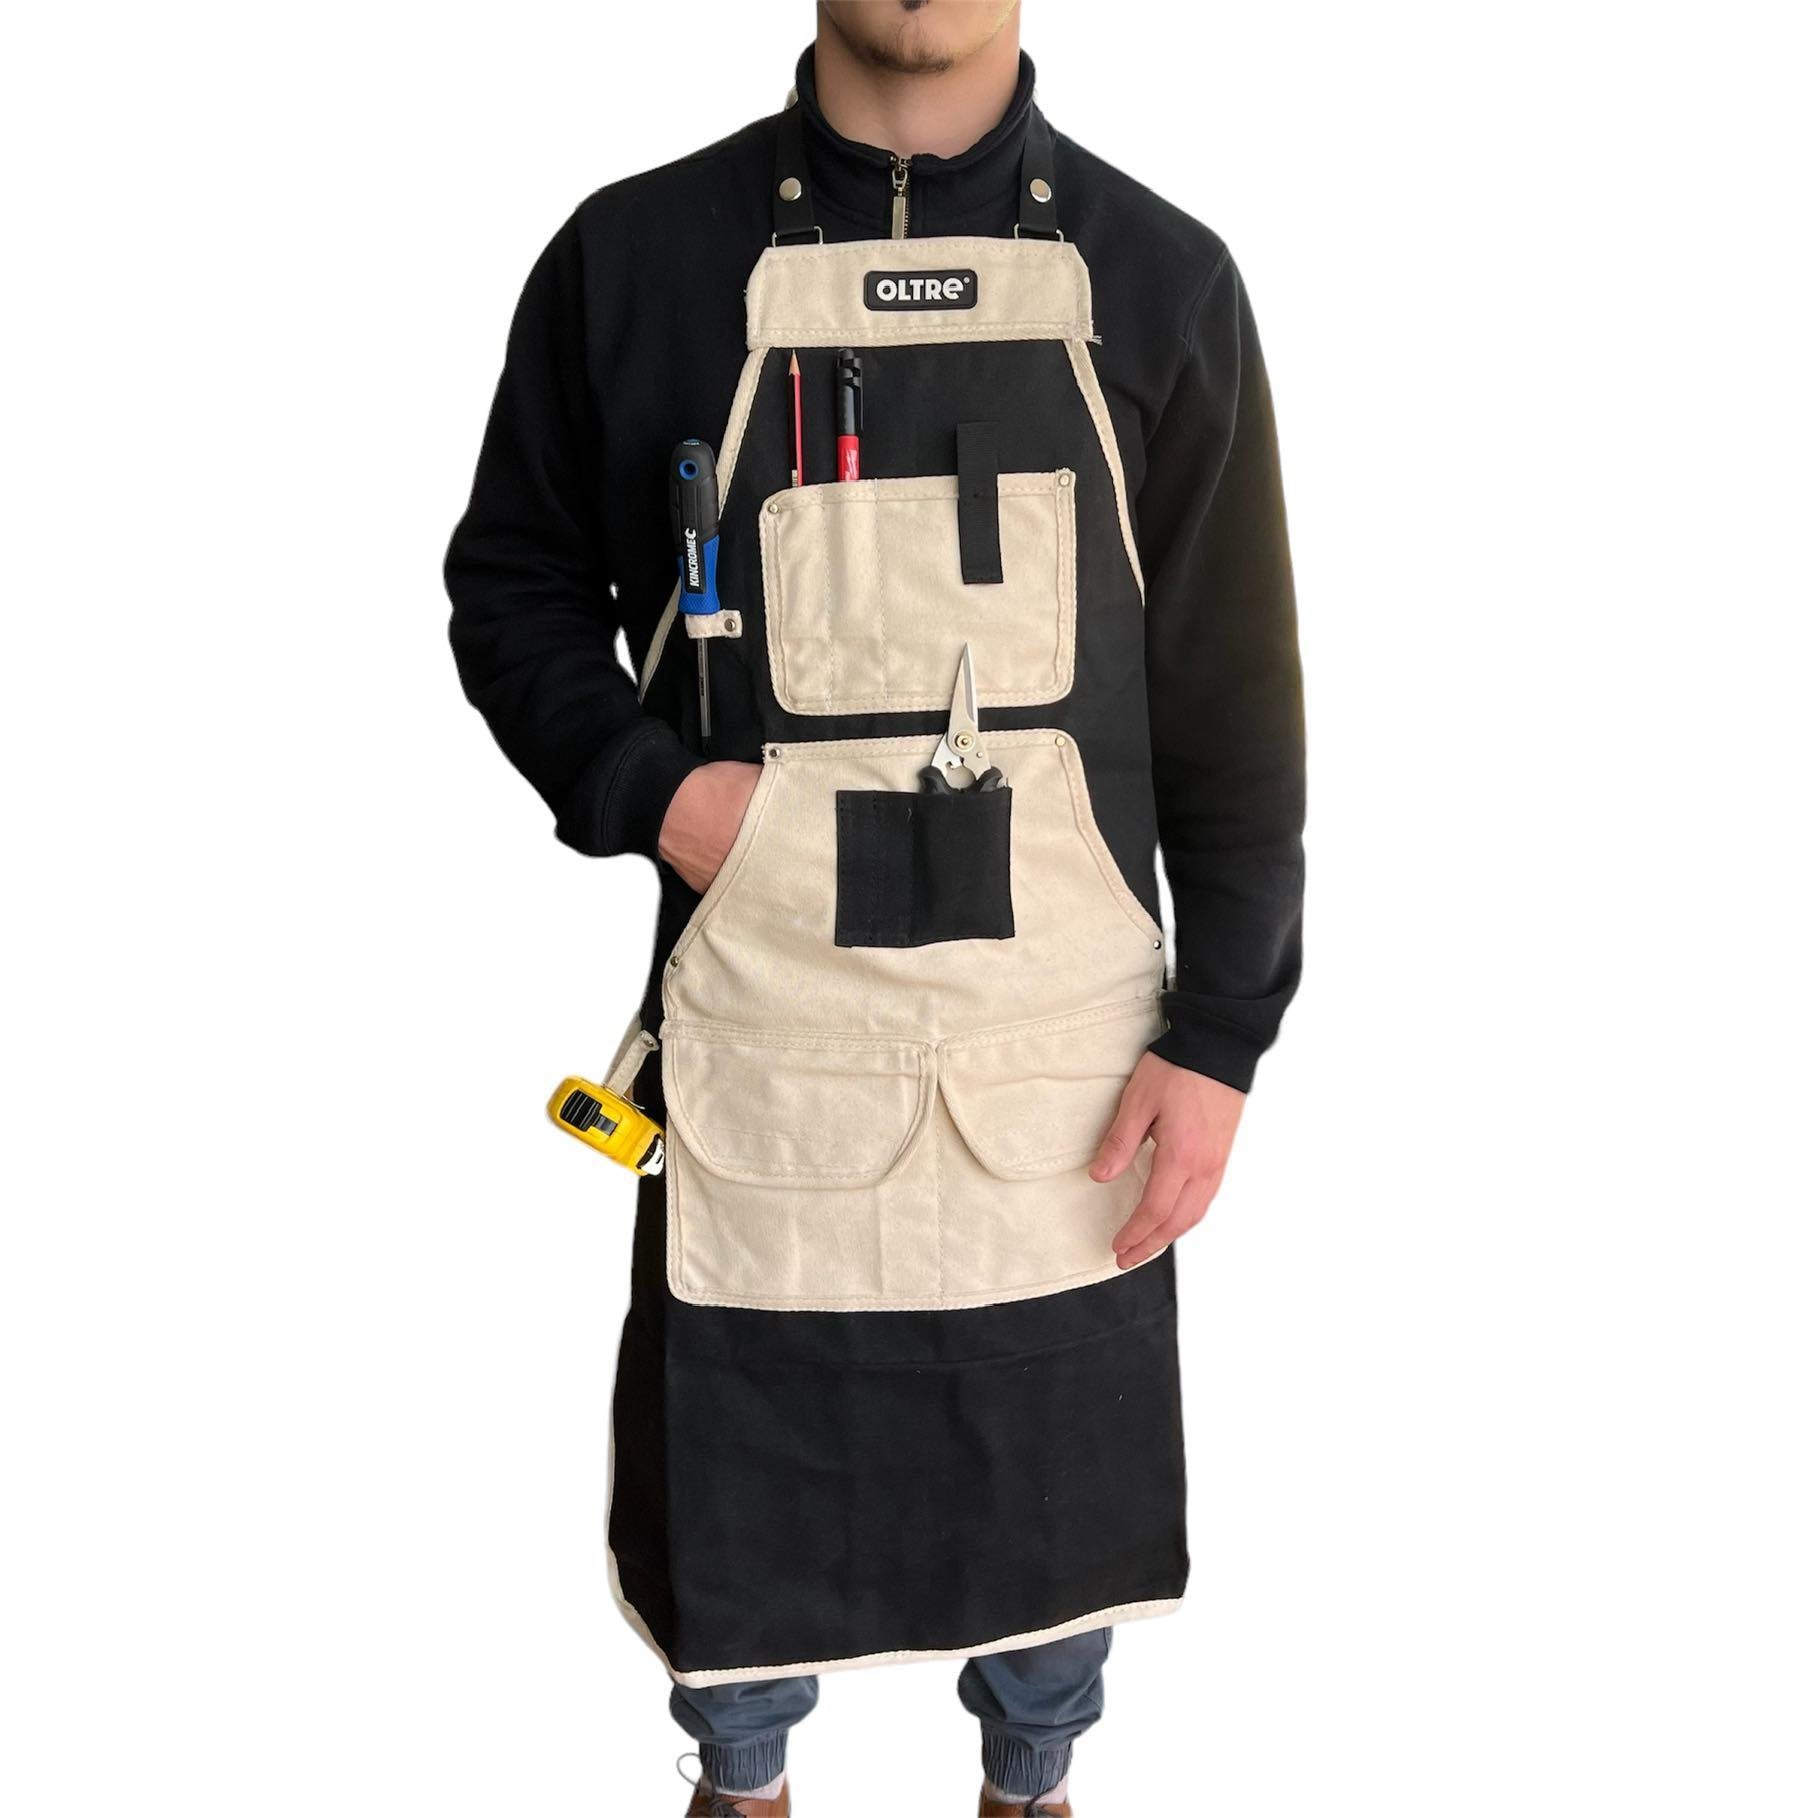 Black + White Canvas Apron By Oltre *New Arrival*